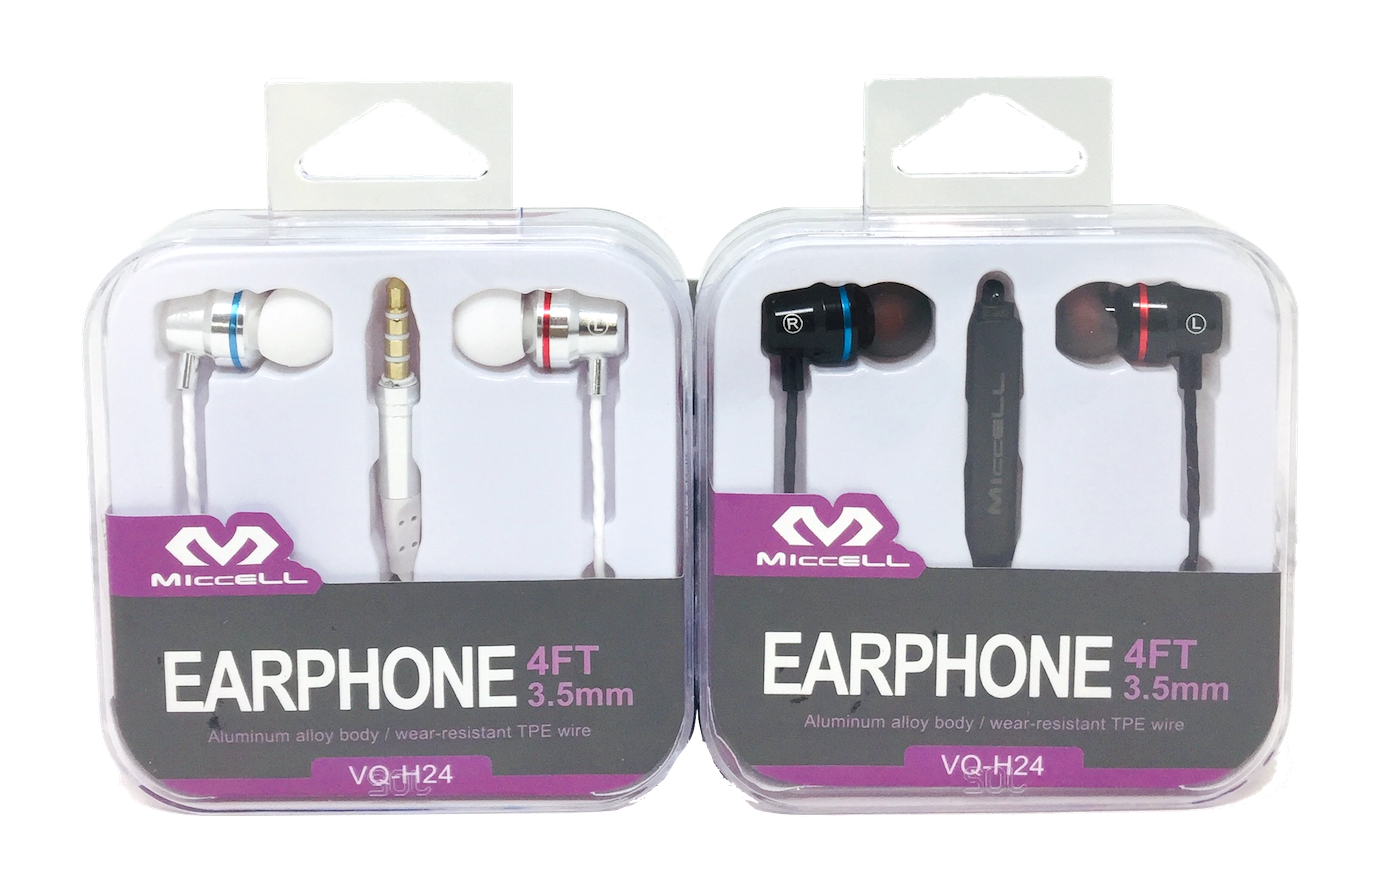 S1024 Miccell Music Stereo Earphone (VQ-H24) Acrylic Pack